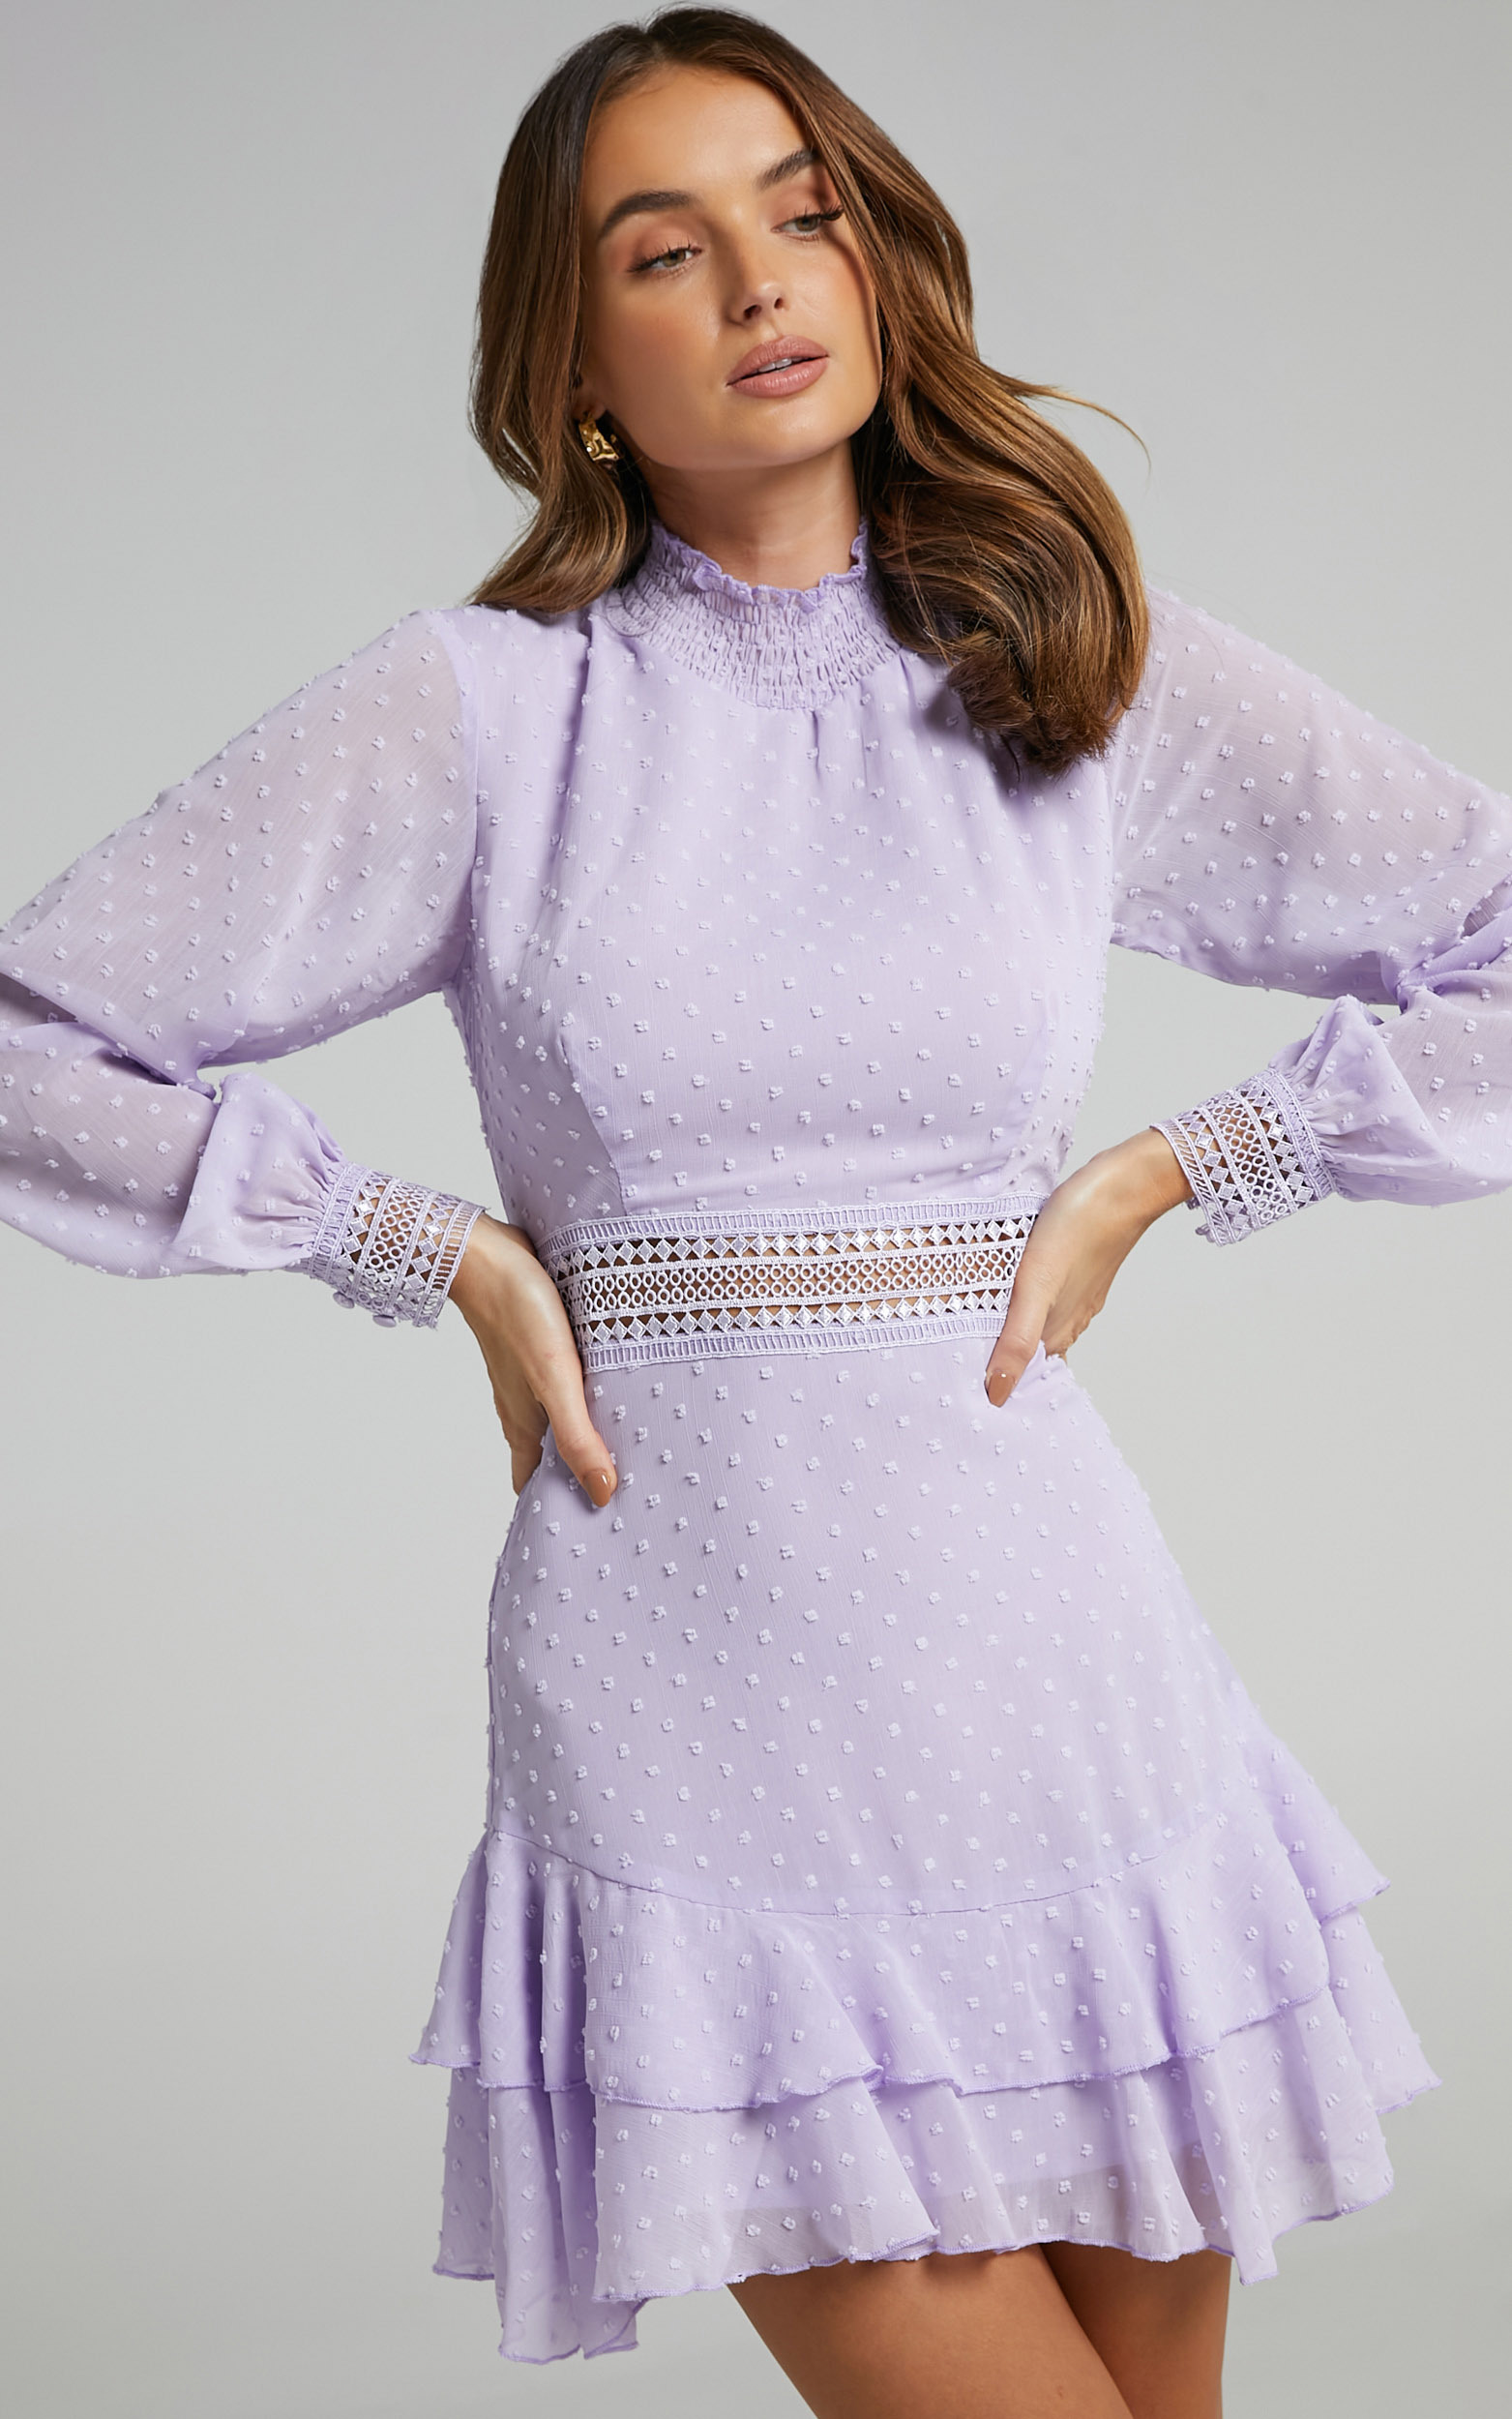 Are You Gonna Kiss Me Long Sleeve Mini Dress in Lilac - 04, PRP3, hi-res image number null